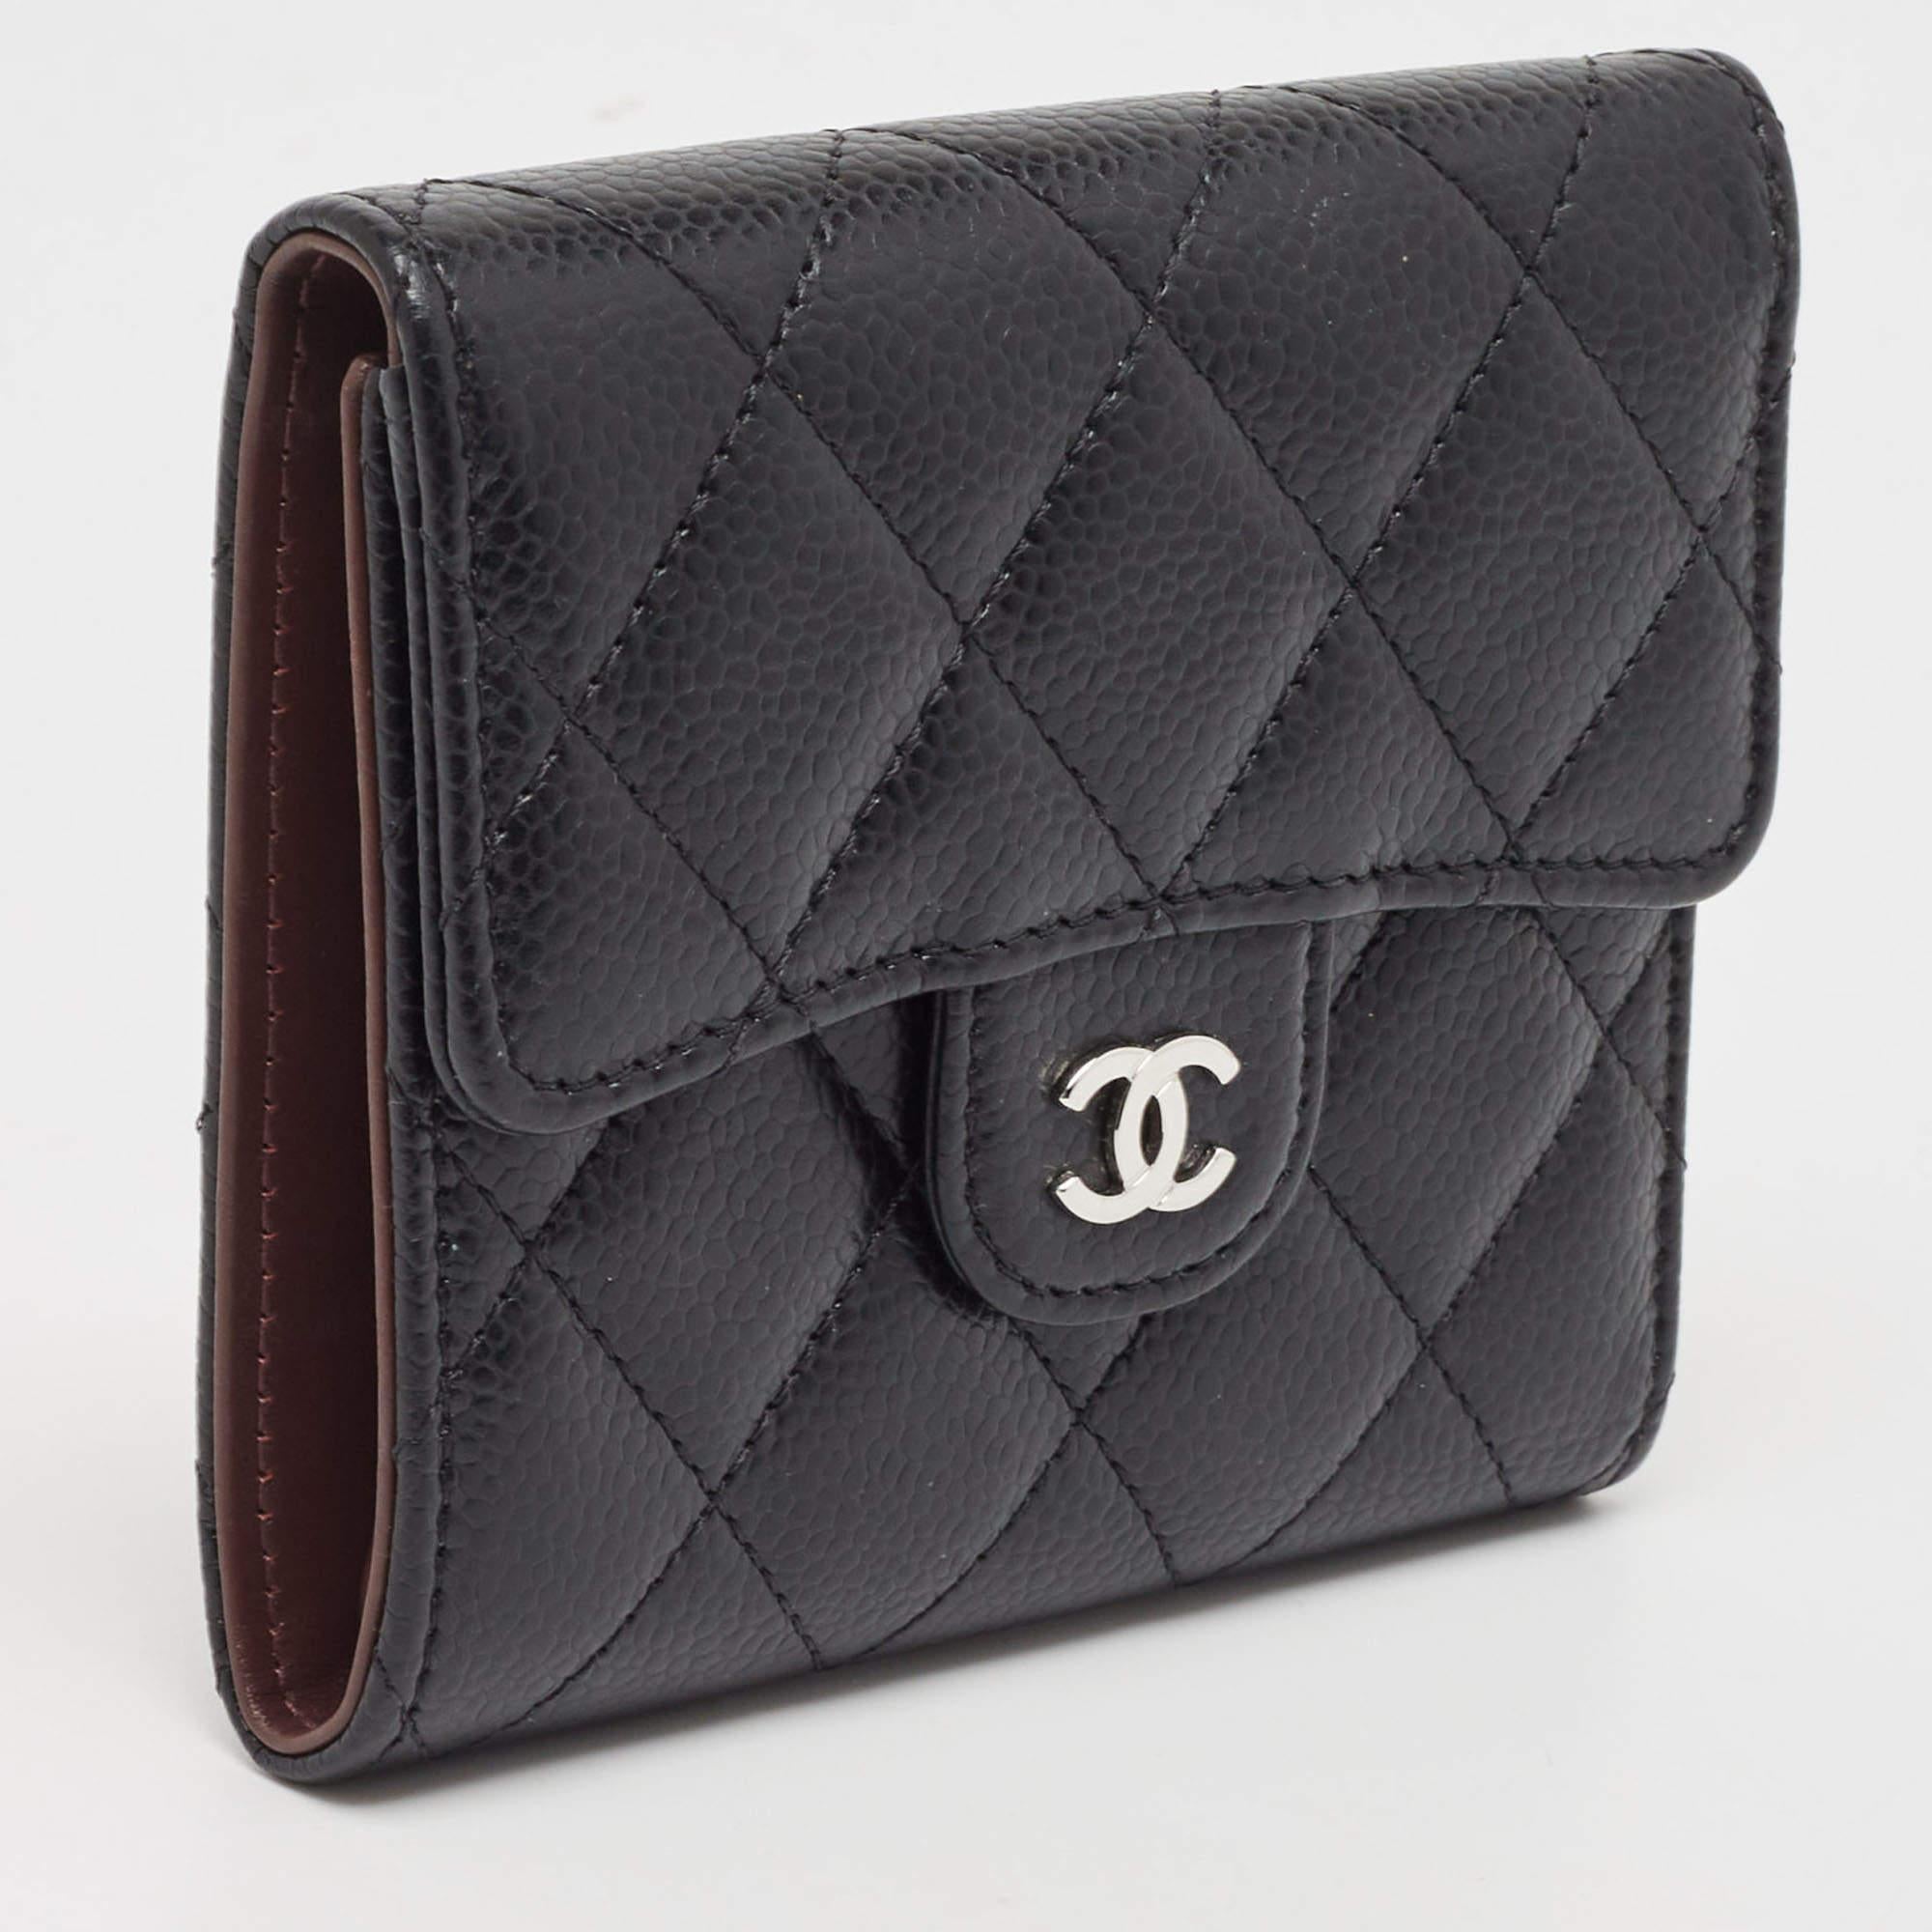 A beautiful wallet for everyday use, this Chanel wallet is perfect to be carried solo or inside your tote while you step out to run errands. It is a durable accessory.

